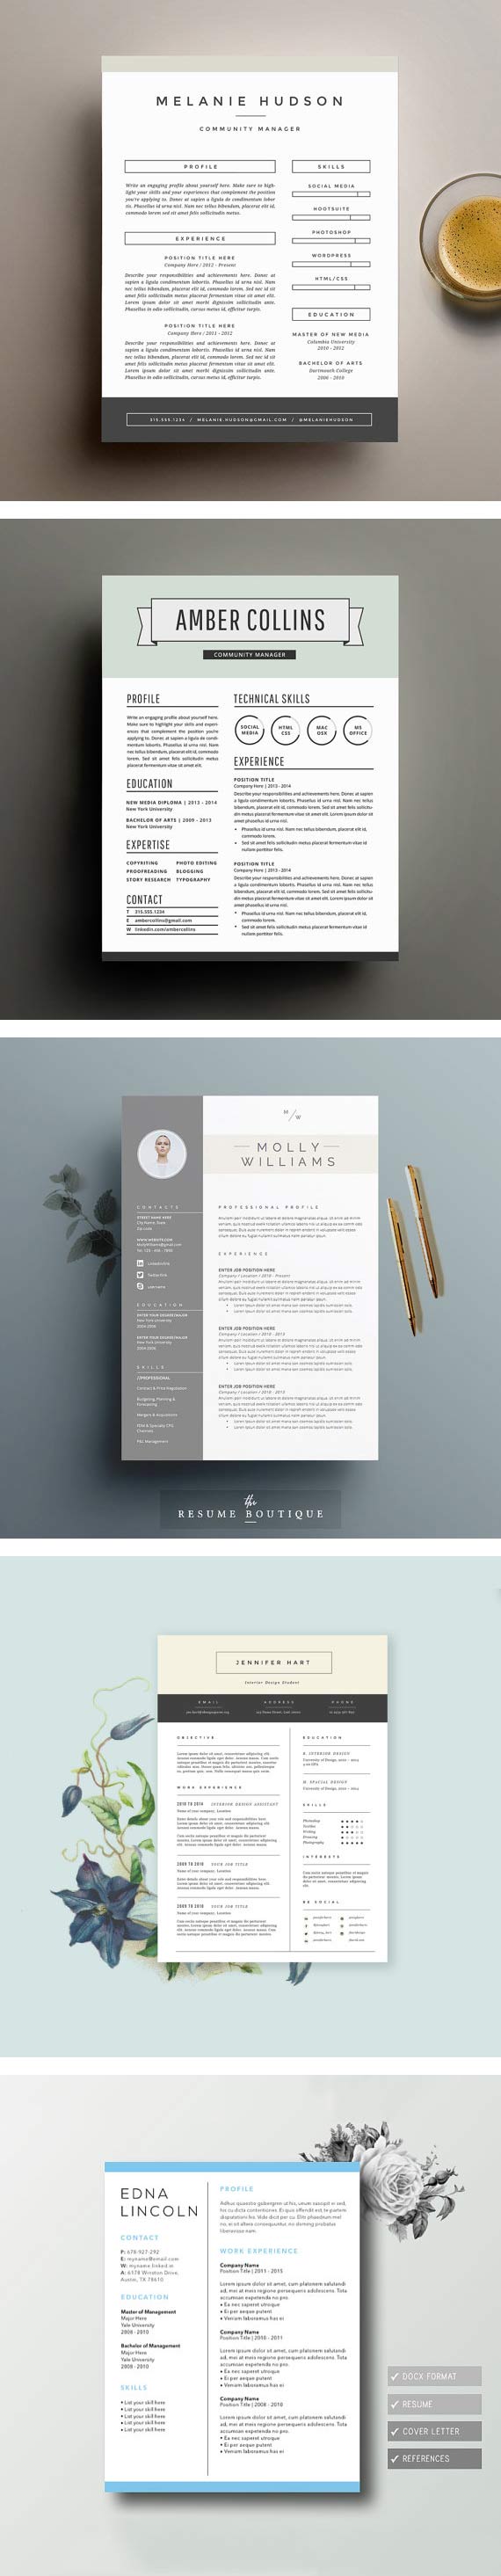 15 Beautiful Resume Templates You Can Buy on Etsy